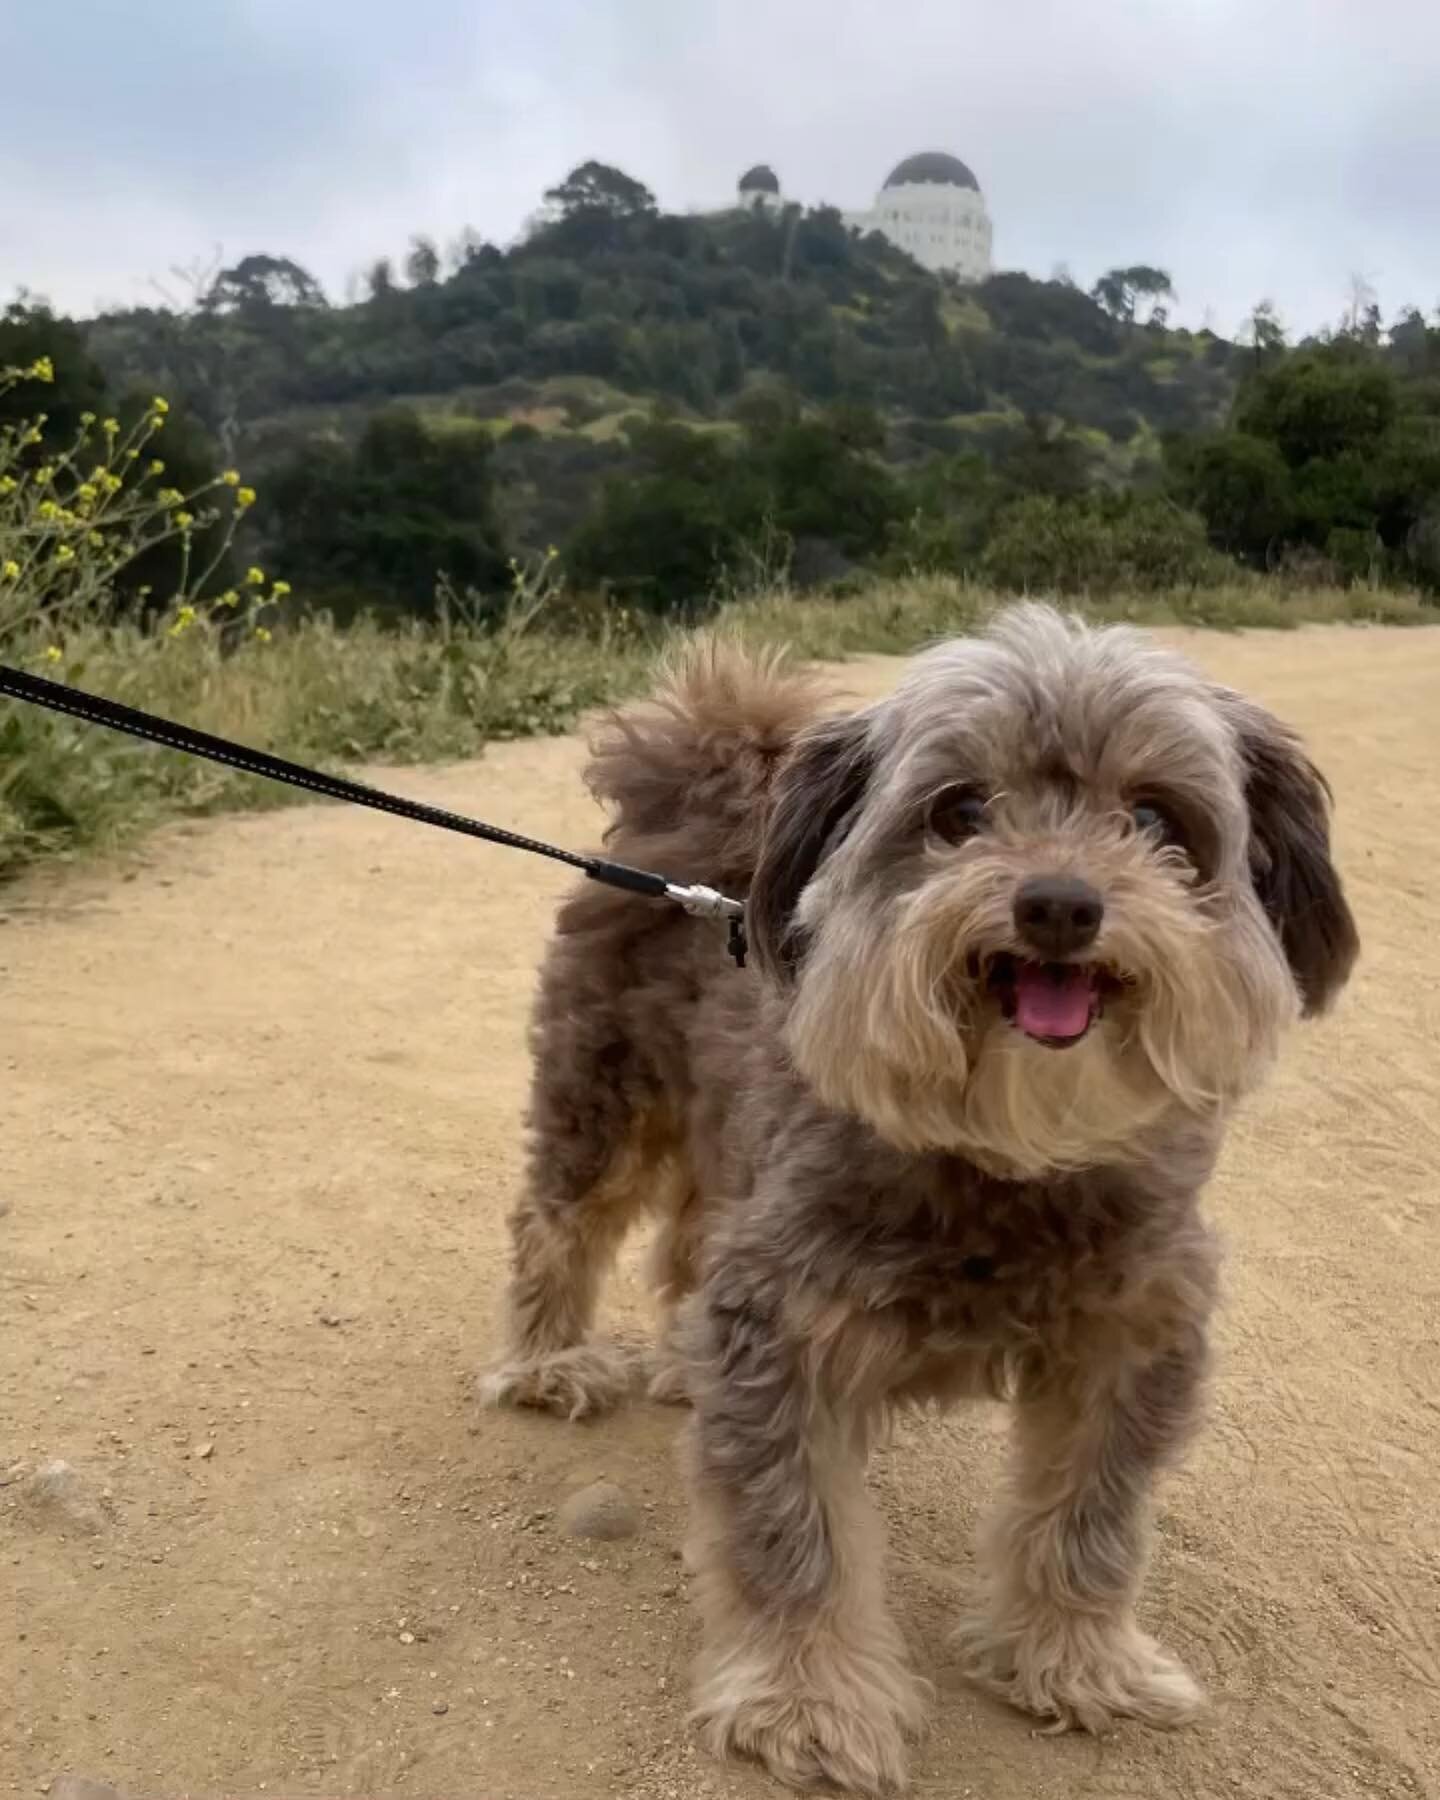 LA is a great city for getting outside and getting those steps in 🐾 

Drop your fave places to walk your dog in the comments 👇

#dogsoflosangeles #losangelesdogs #losangeleshiking #explorelosangeles #walkingthedog #griffithobservatory #runyoncanyon